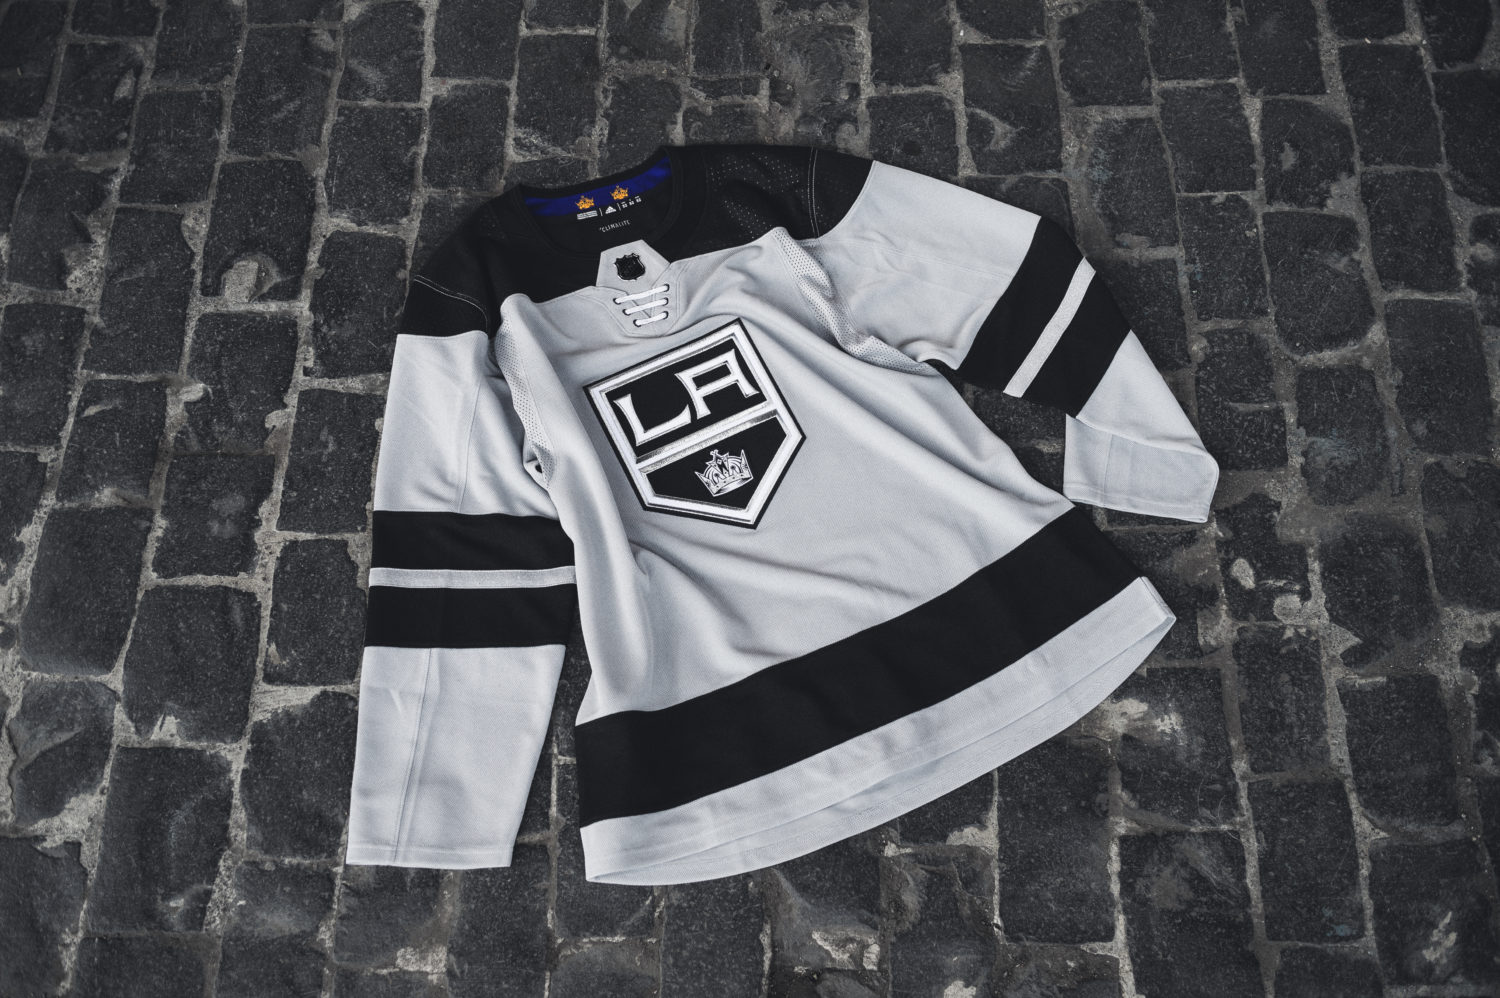 In collaborative effort, Silver Jersey added to Kings' permanent